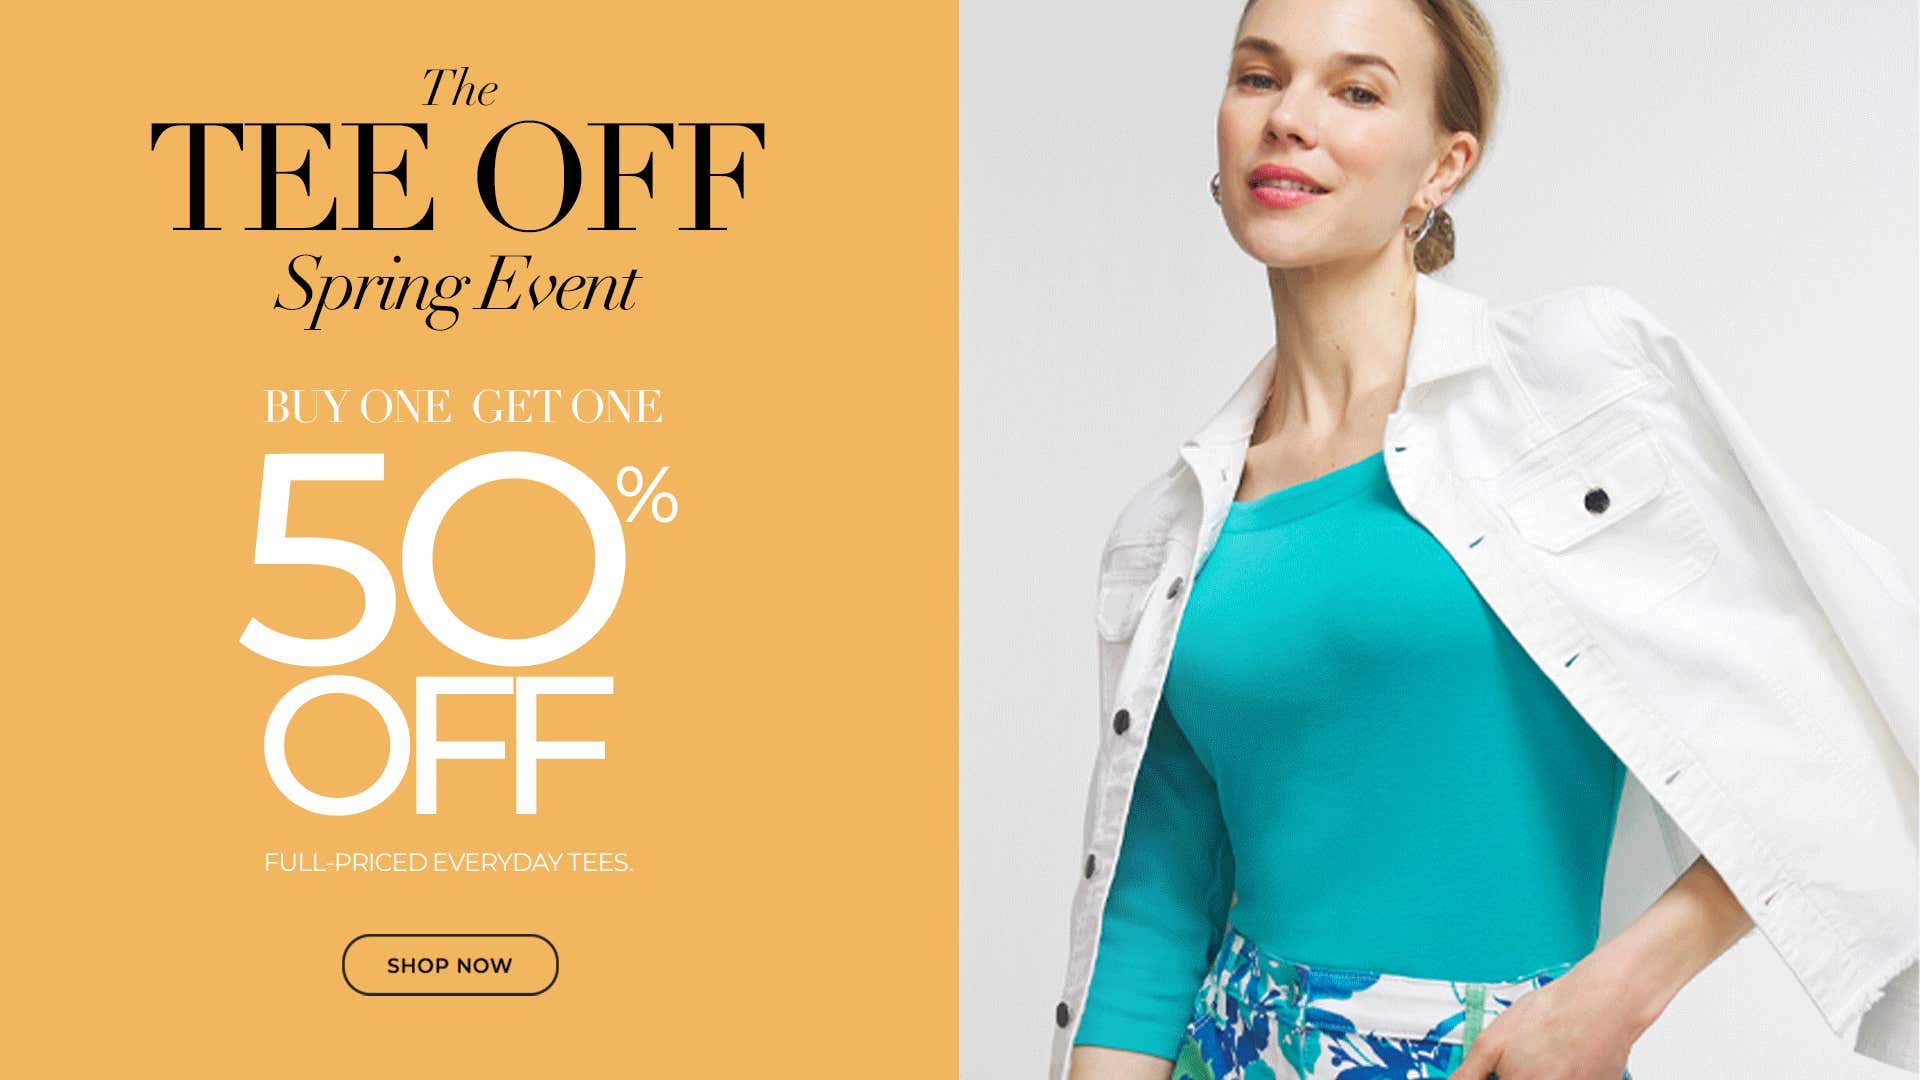 Women's Clothing - Dresses, Pants, Blouses, Jeans & More - Chico's Off The  Rack - Chico's Outlet